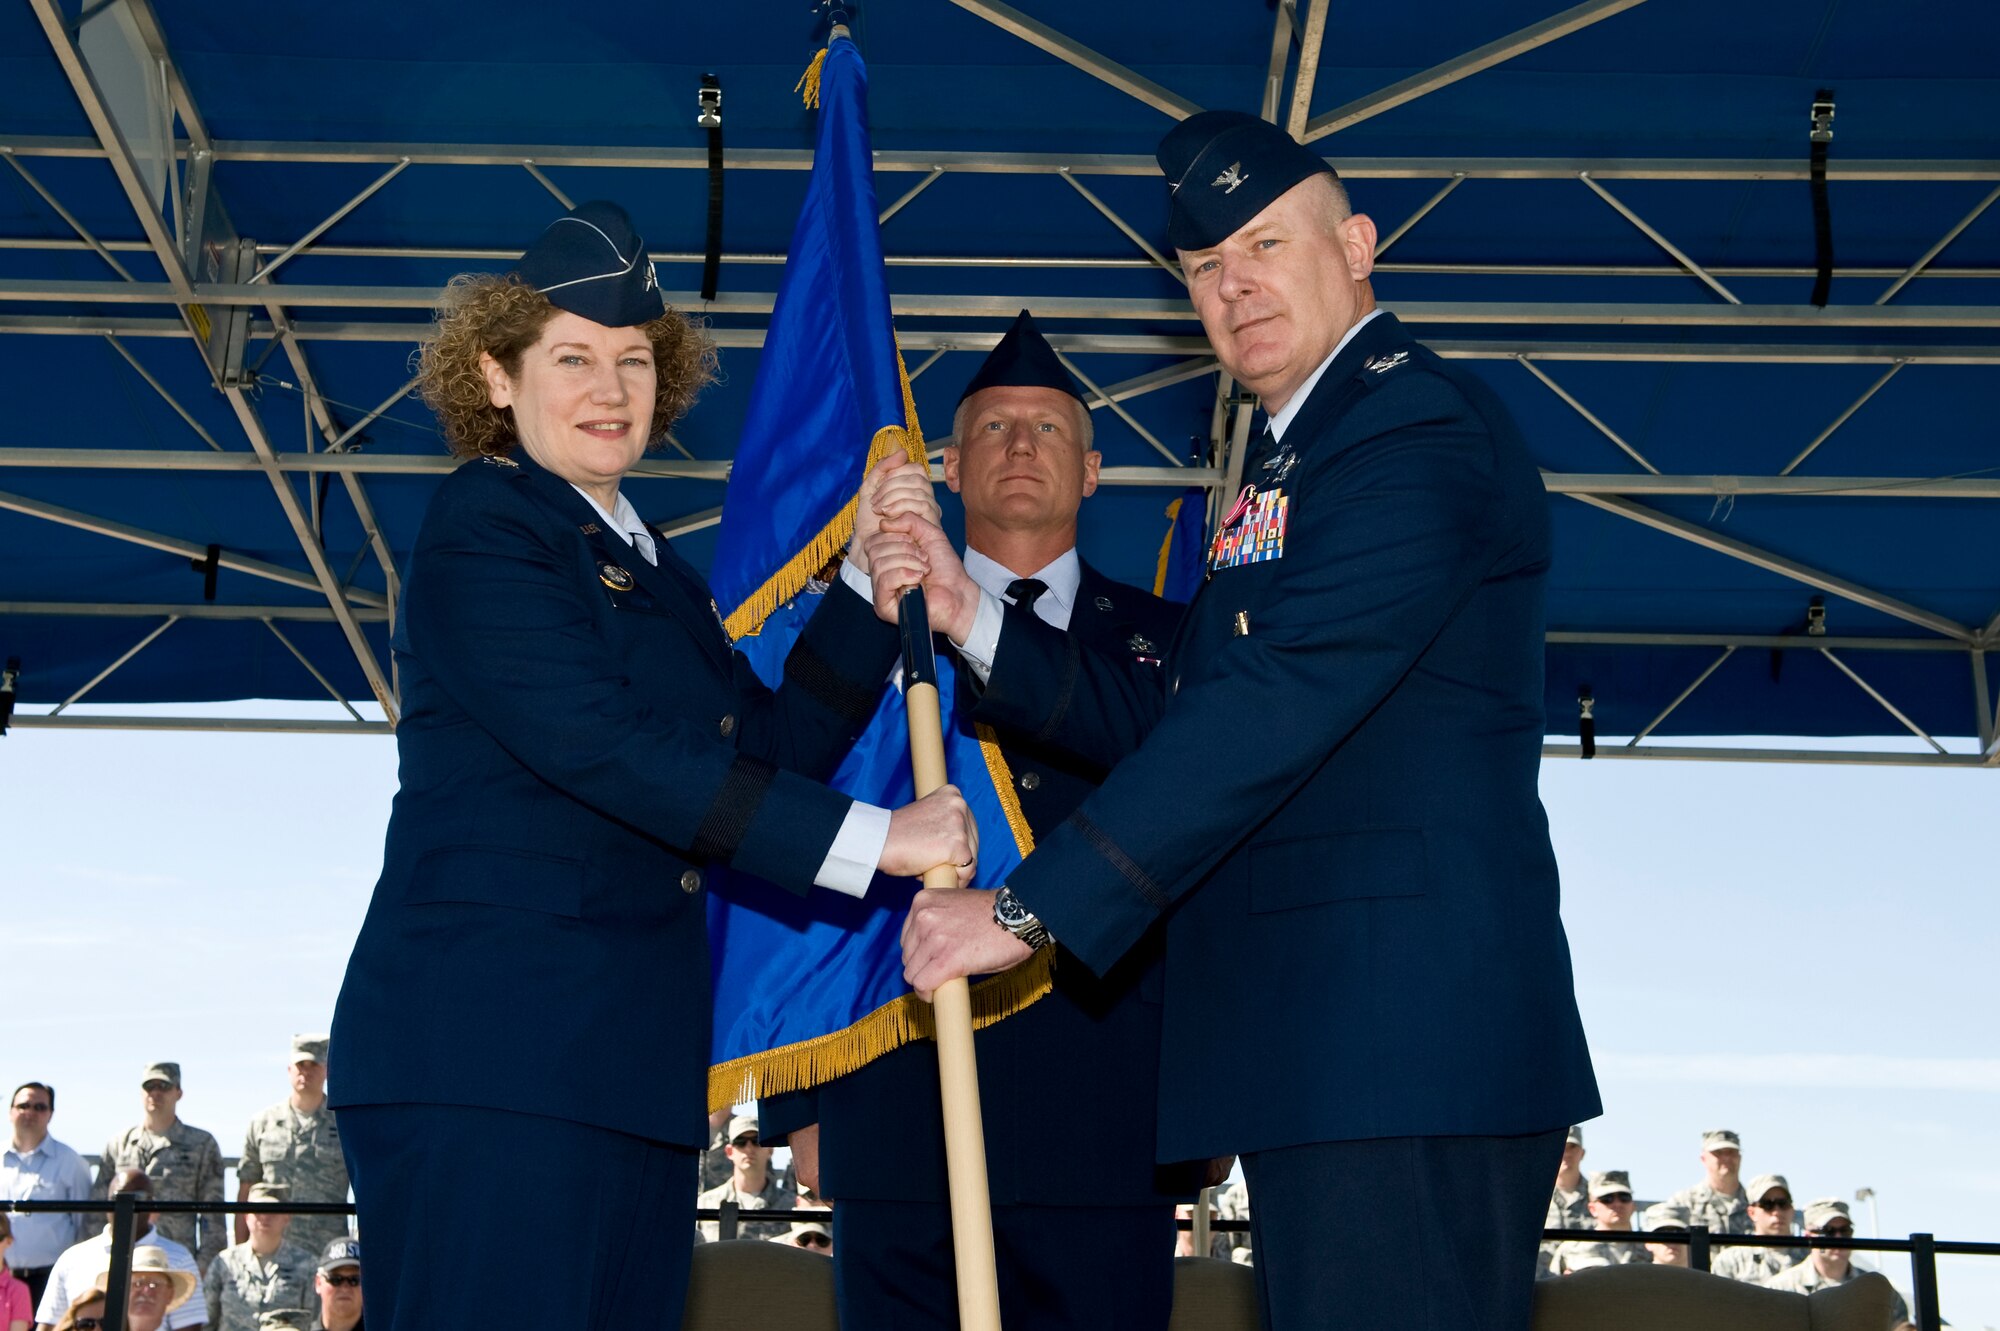 Lt. Gen. Susan J. Helms, 14th Air Force commander, retrieves the 460th Space Wing guidon from Col. Dan A. Dant June 28, 2013, during the 460th SW change of command ceremony on Buckley Air Force Base, Colo. This event marked the end of Dant's two years of command. (U.S. Air Force photo by Senior Airman Phillip Houk/Released)
